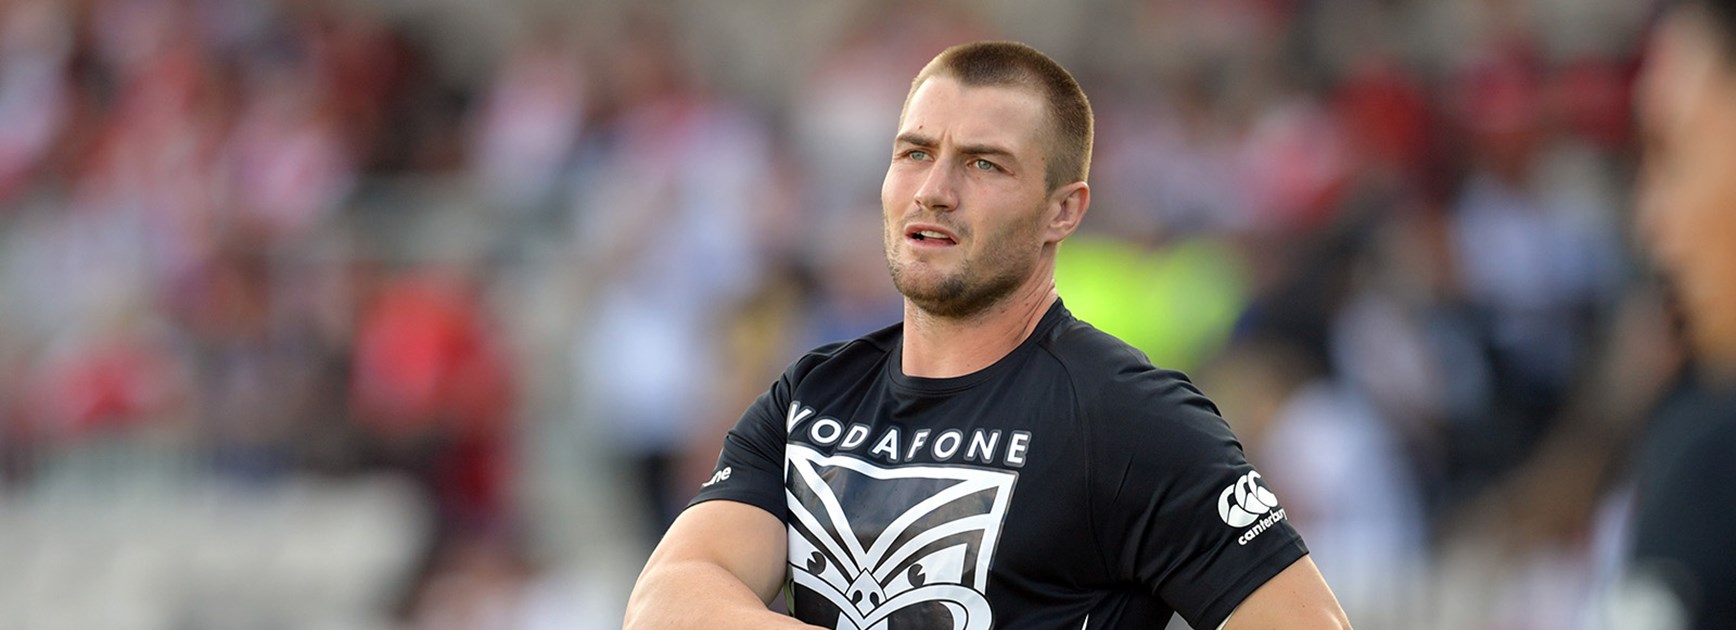 Kieran Foran was ruled out in the warm-up.